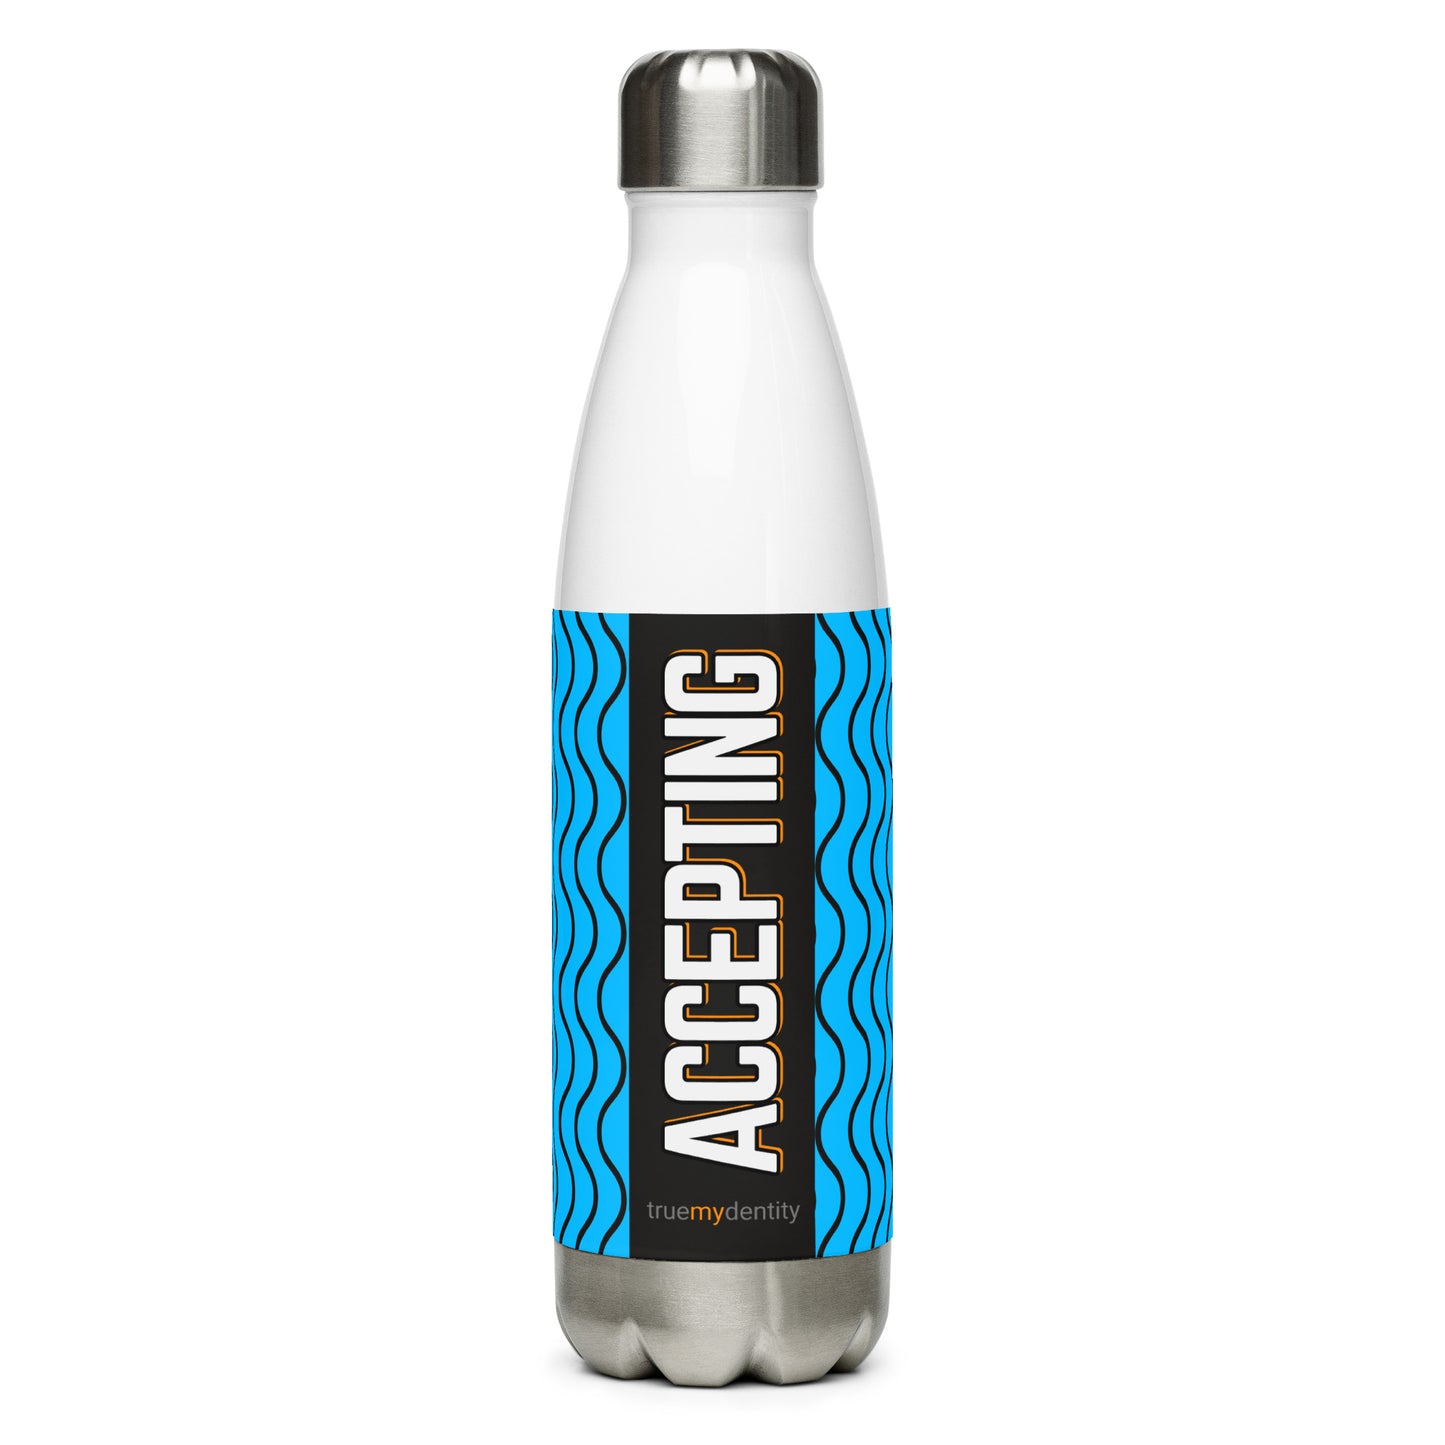 ACCEPTING Stainless Steel Water Bottle Blue Wave Design, 17 oz, in Black or White